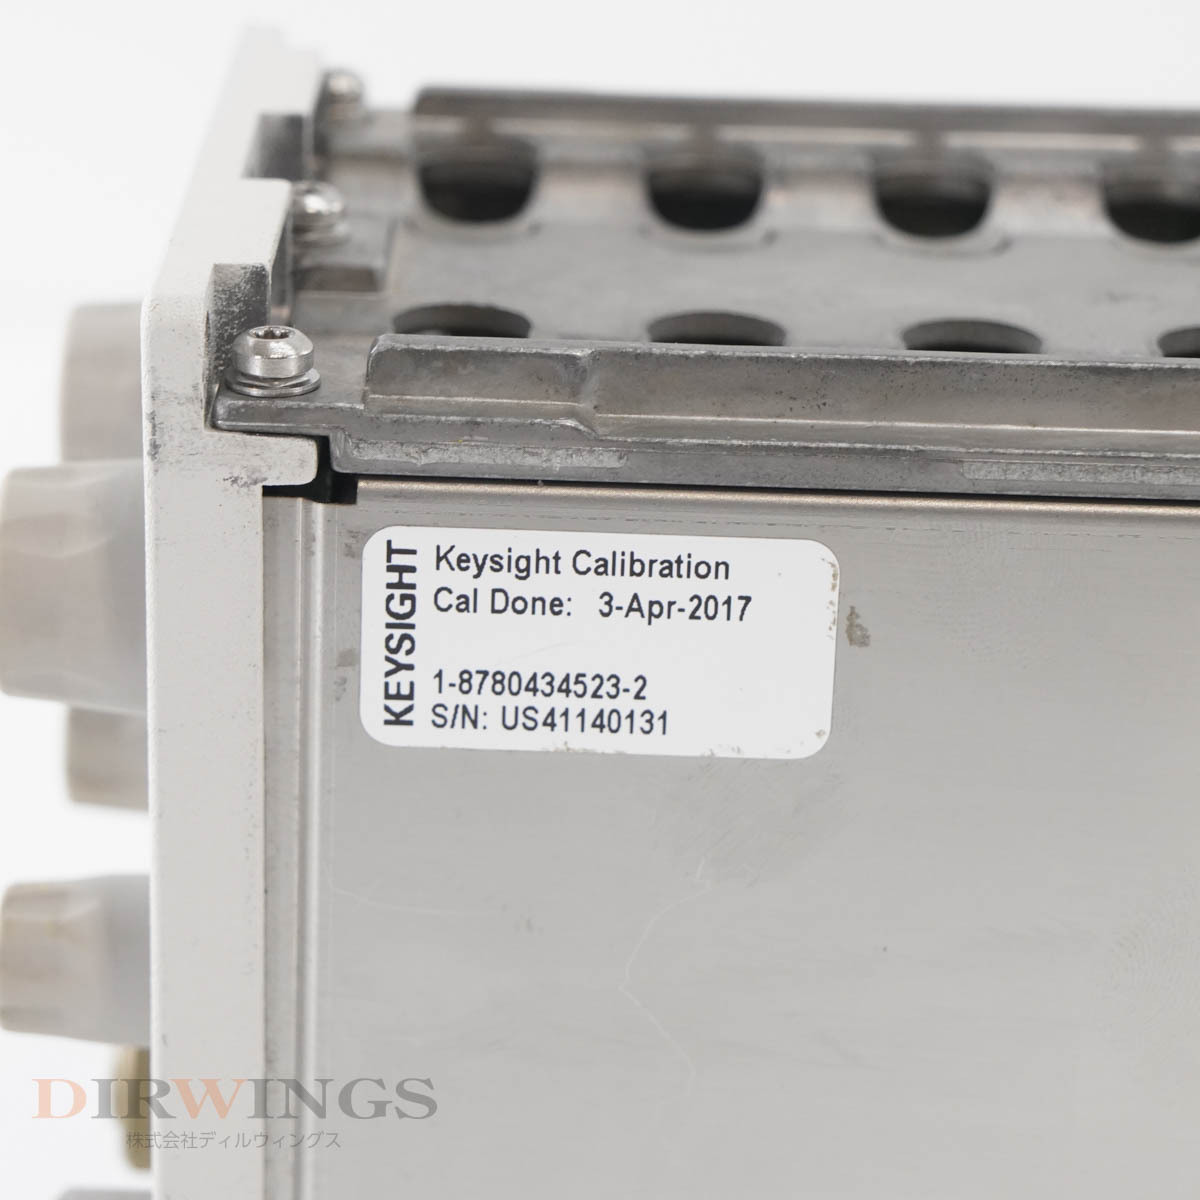 [DW] 8日保証 86106B Agilent 1000-1600nm アジレント hp Keysight 10Gb/s Reference Receiver Optical/Electrical Module...[05791-1009]の画像7